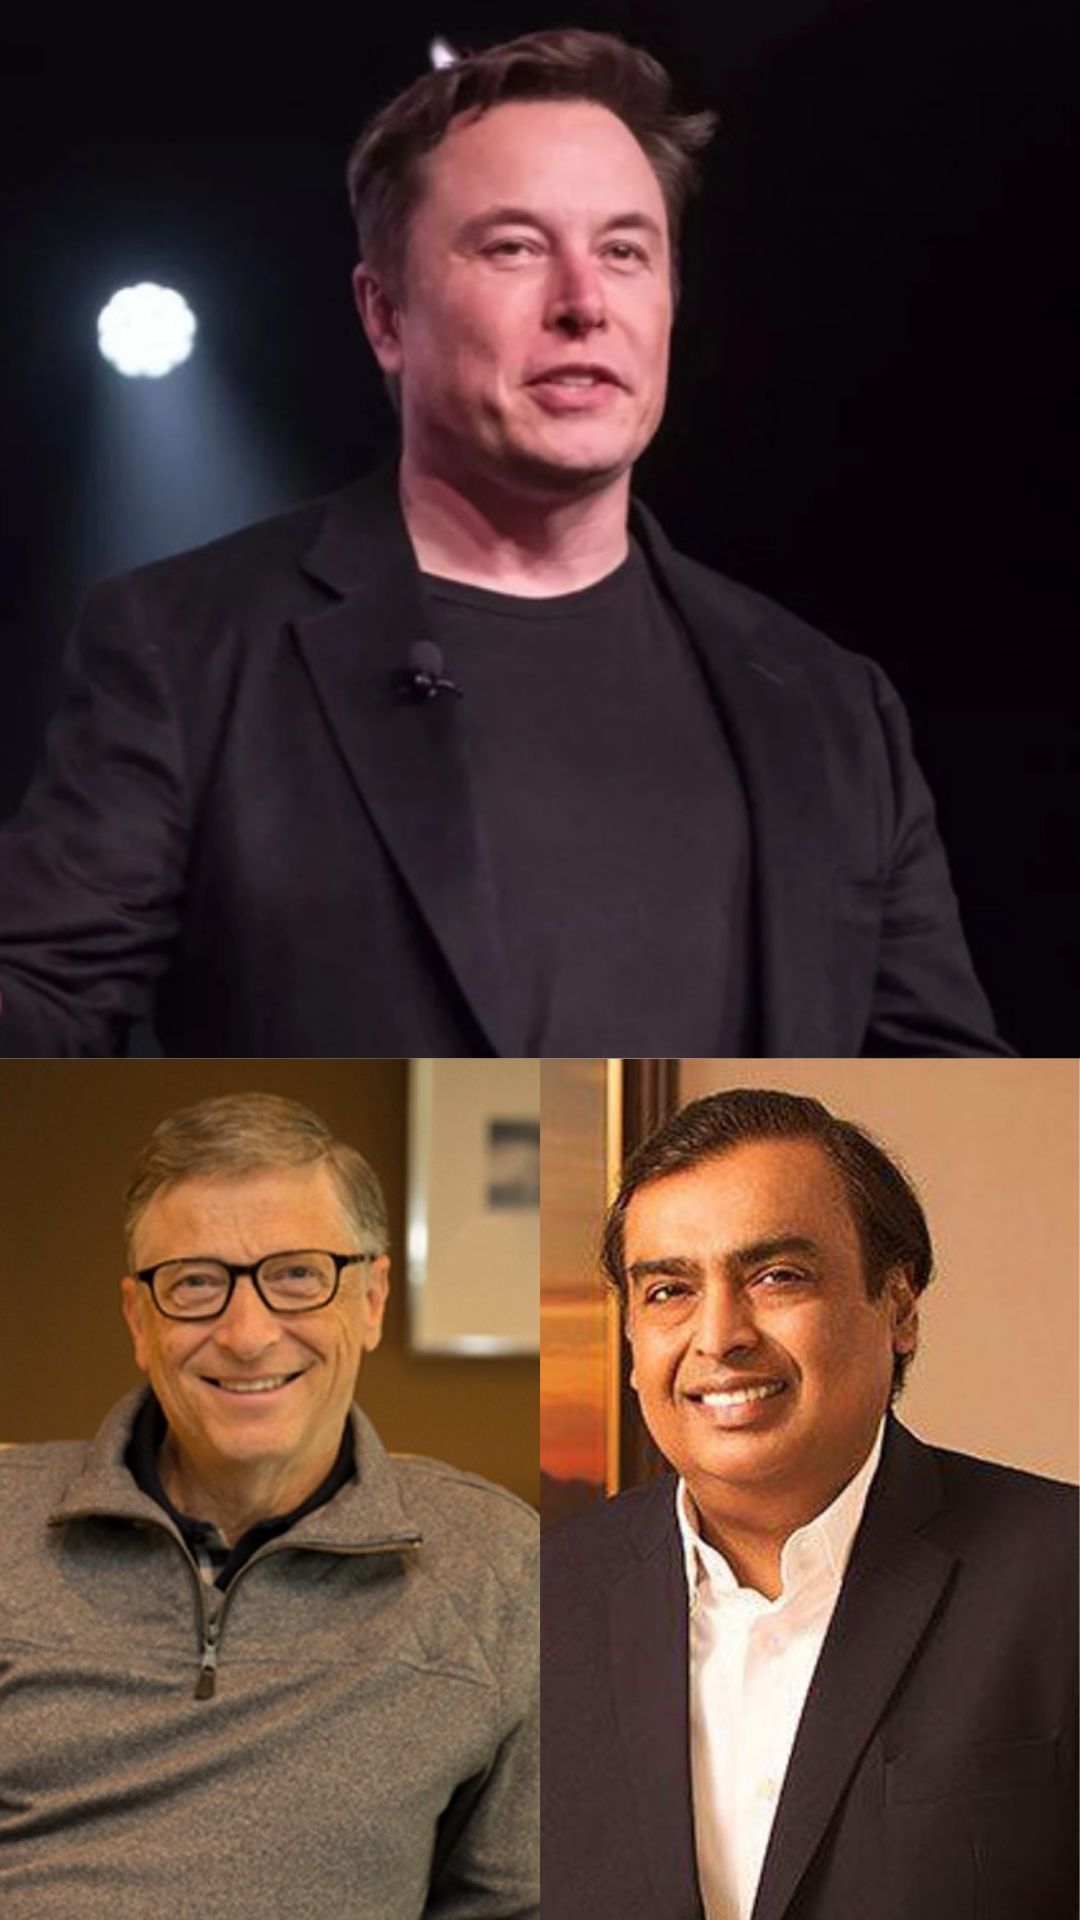 Who is the richest person in the world? Top 10 richest people in